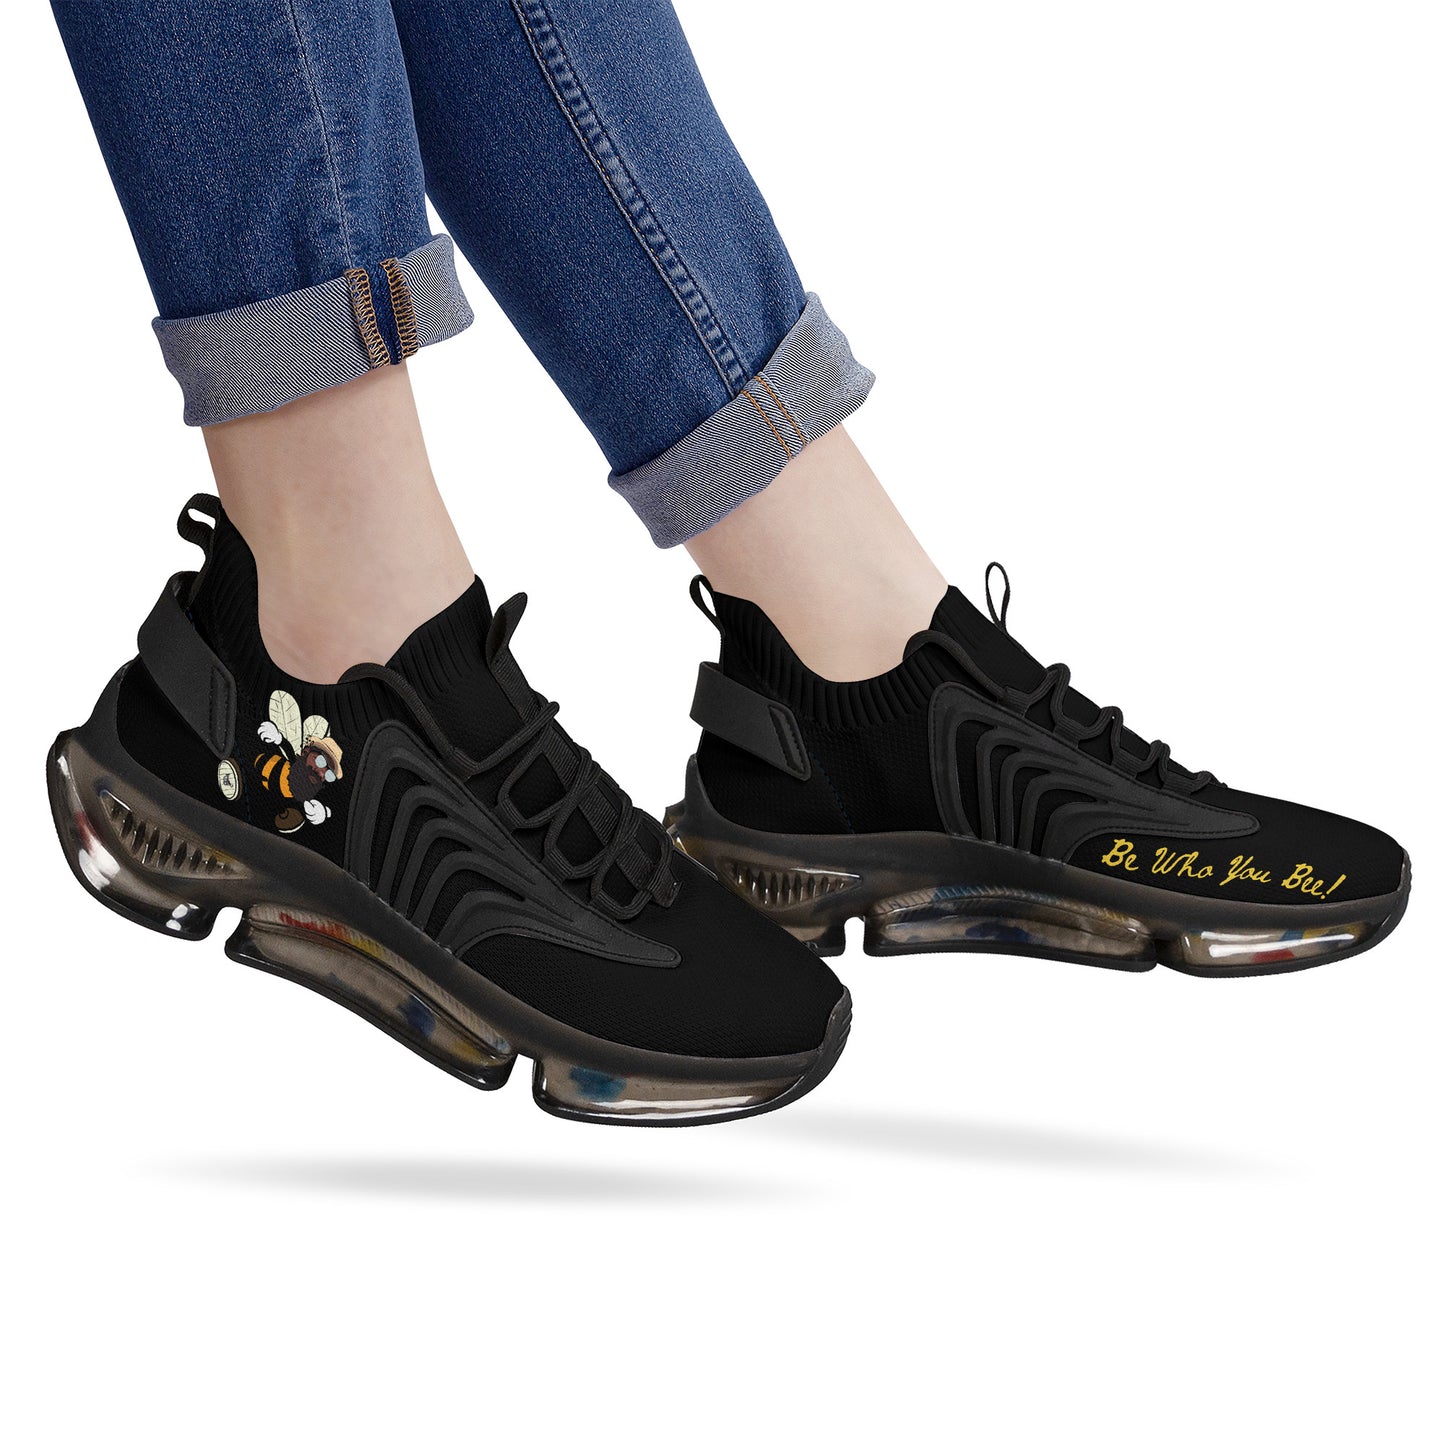 Be Who You Bee! Air Max React Sneakers - Black